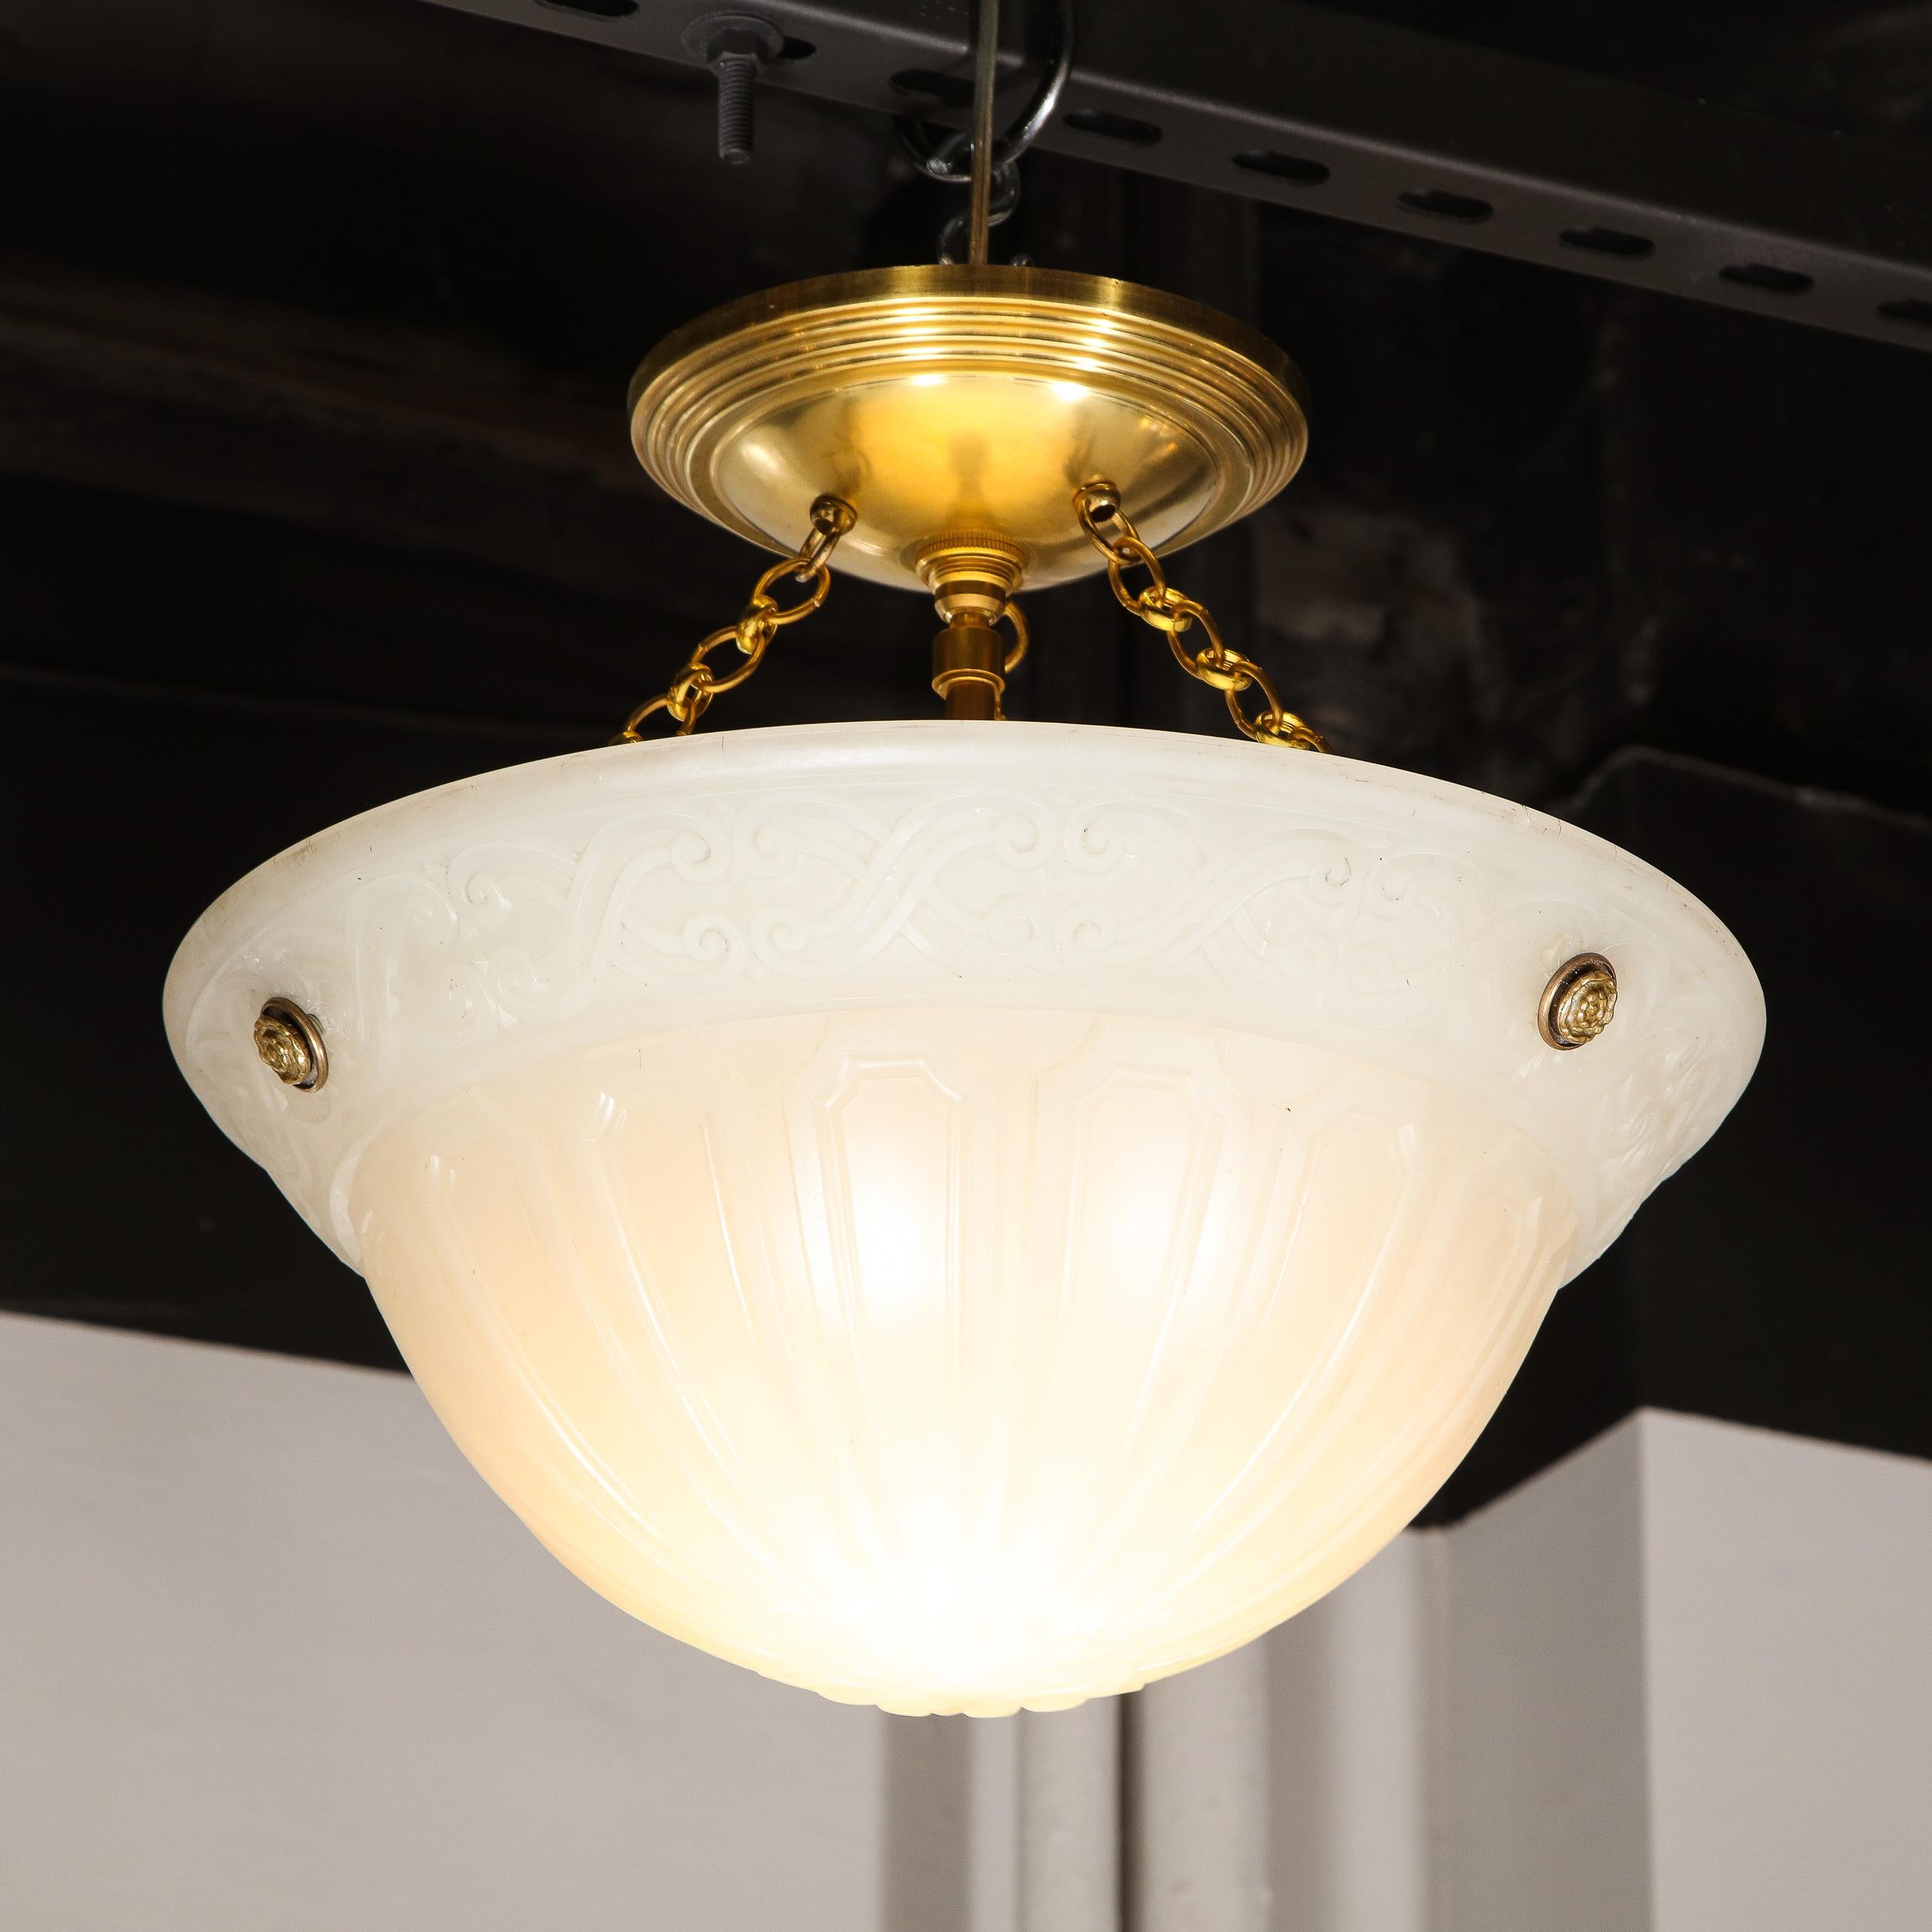 This elegant Art Deco pendant was realized in the United States circa 1930. it features a domed milk glass body replete with a geometric arch form detailing around its domed body; starburst flame detailing at its nadir; and stylized neoclassical x